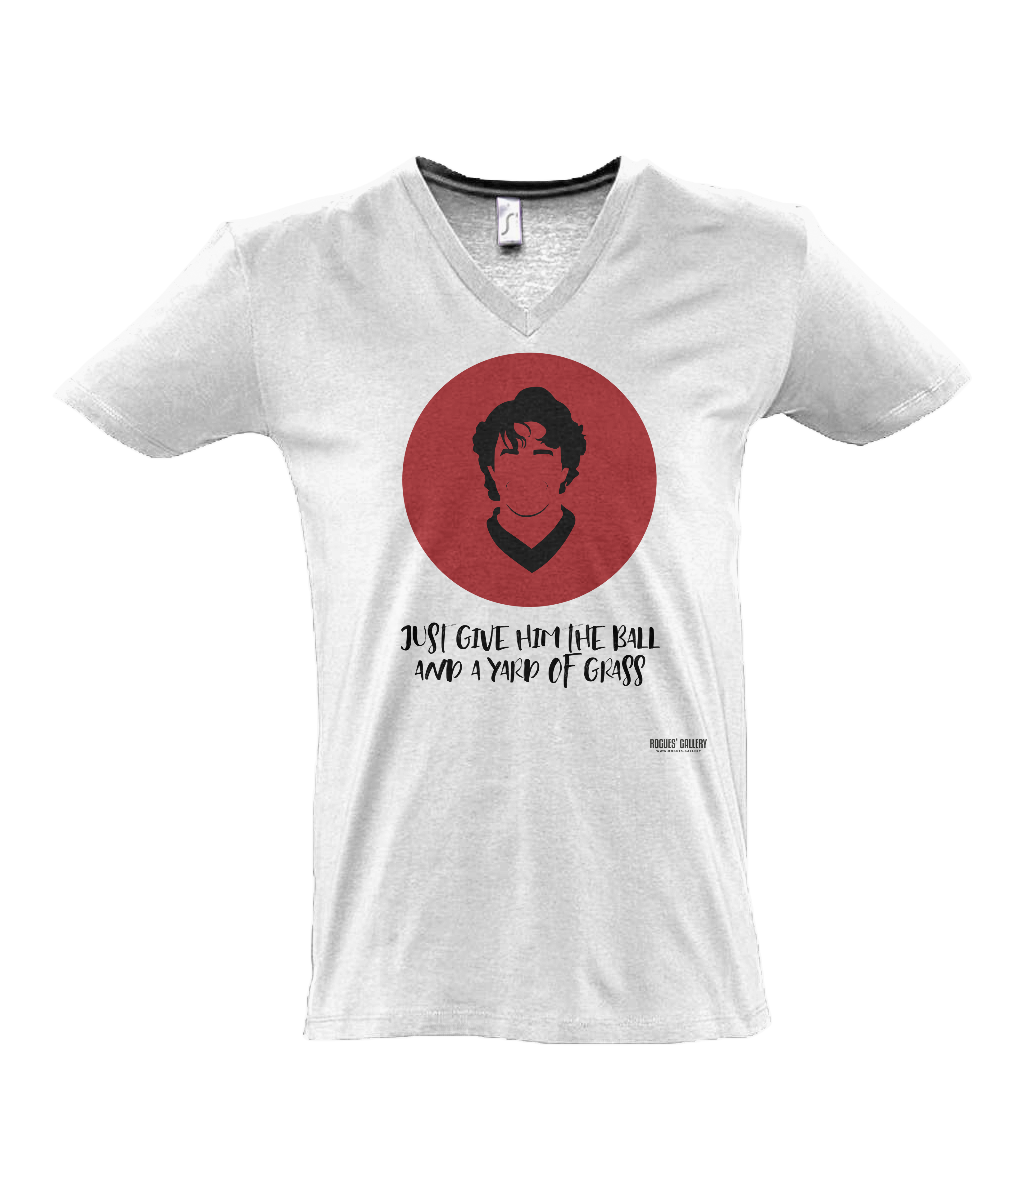 Give Him The Ball T-Shirt